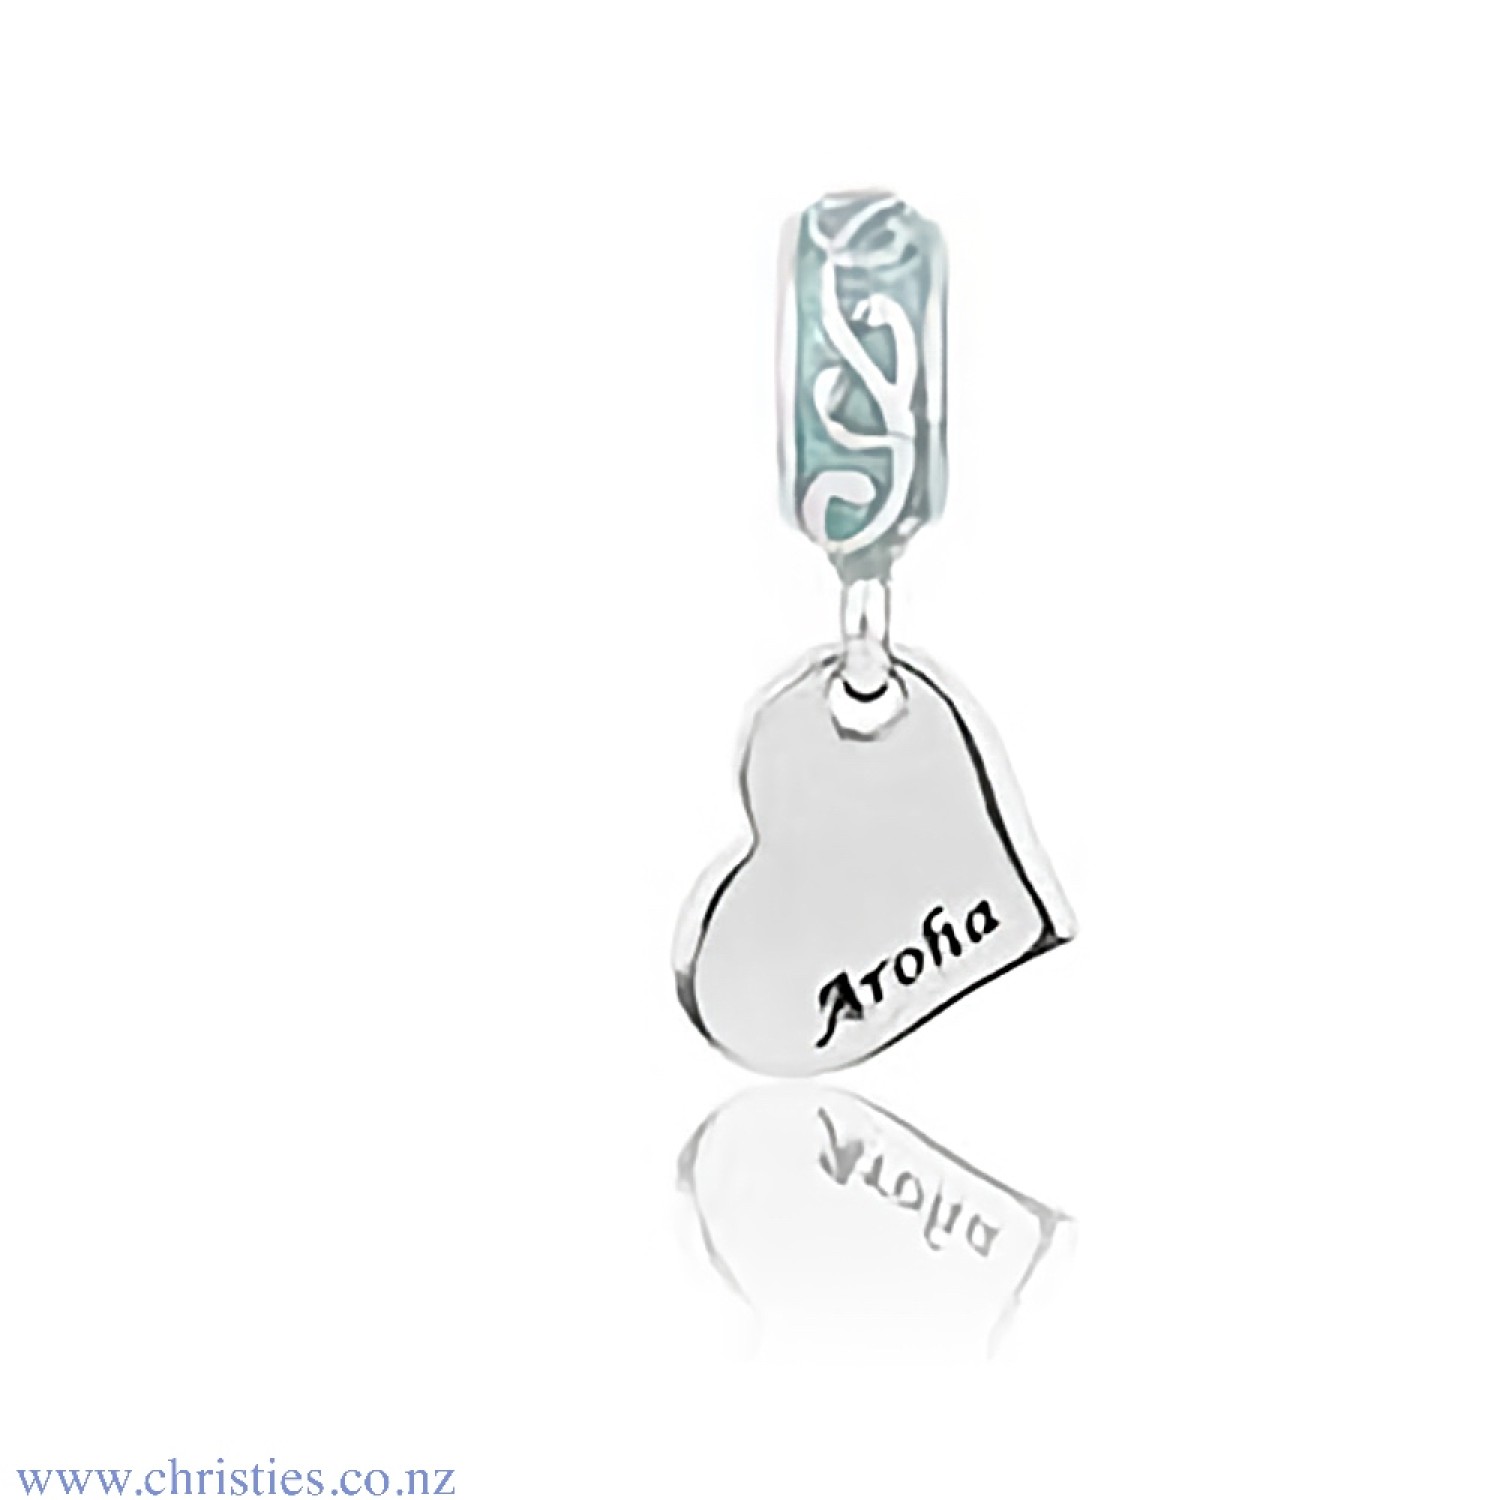 LKD049 Evolve Jewellery Aroha Deep Love Pendant Blue Charm. Aroha is often translated as “Love”, but the full meaning of the word encompasses all of the five senses, the ego and also intellect, and cannot be contained in just one word.The Aroha pendant ch